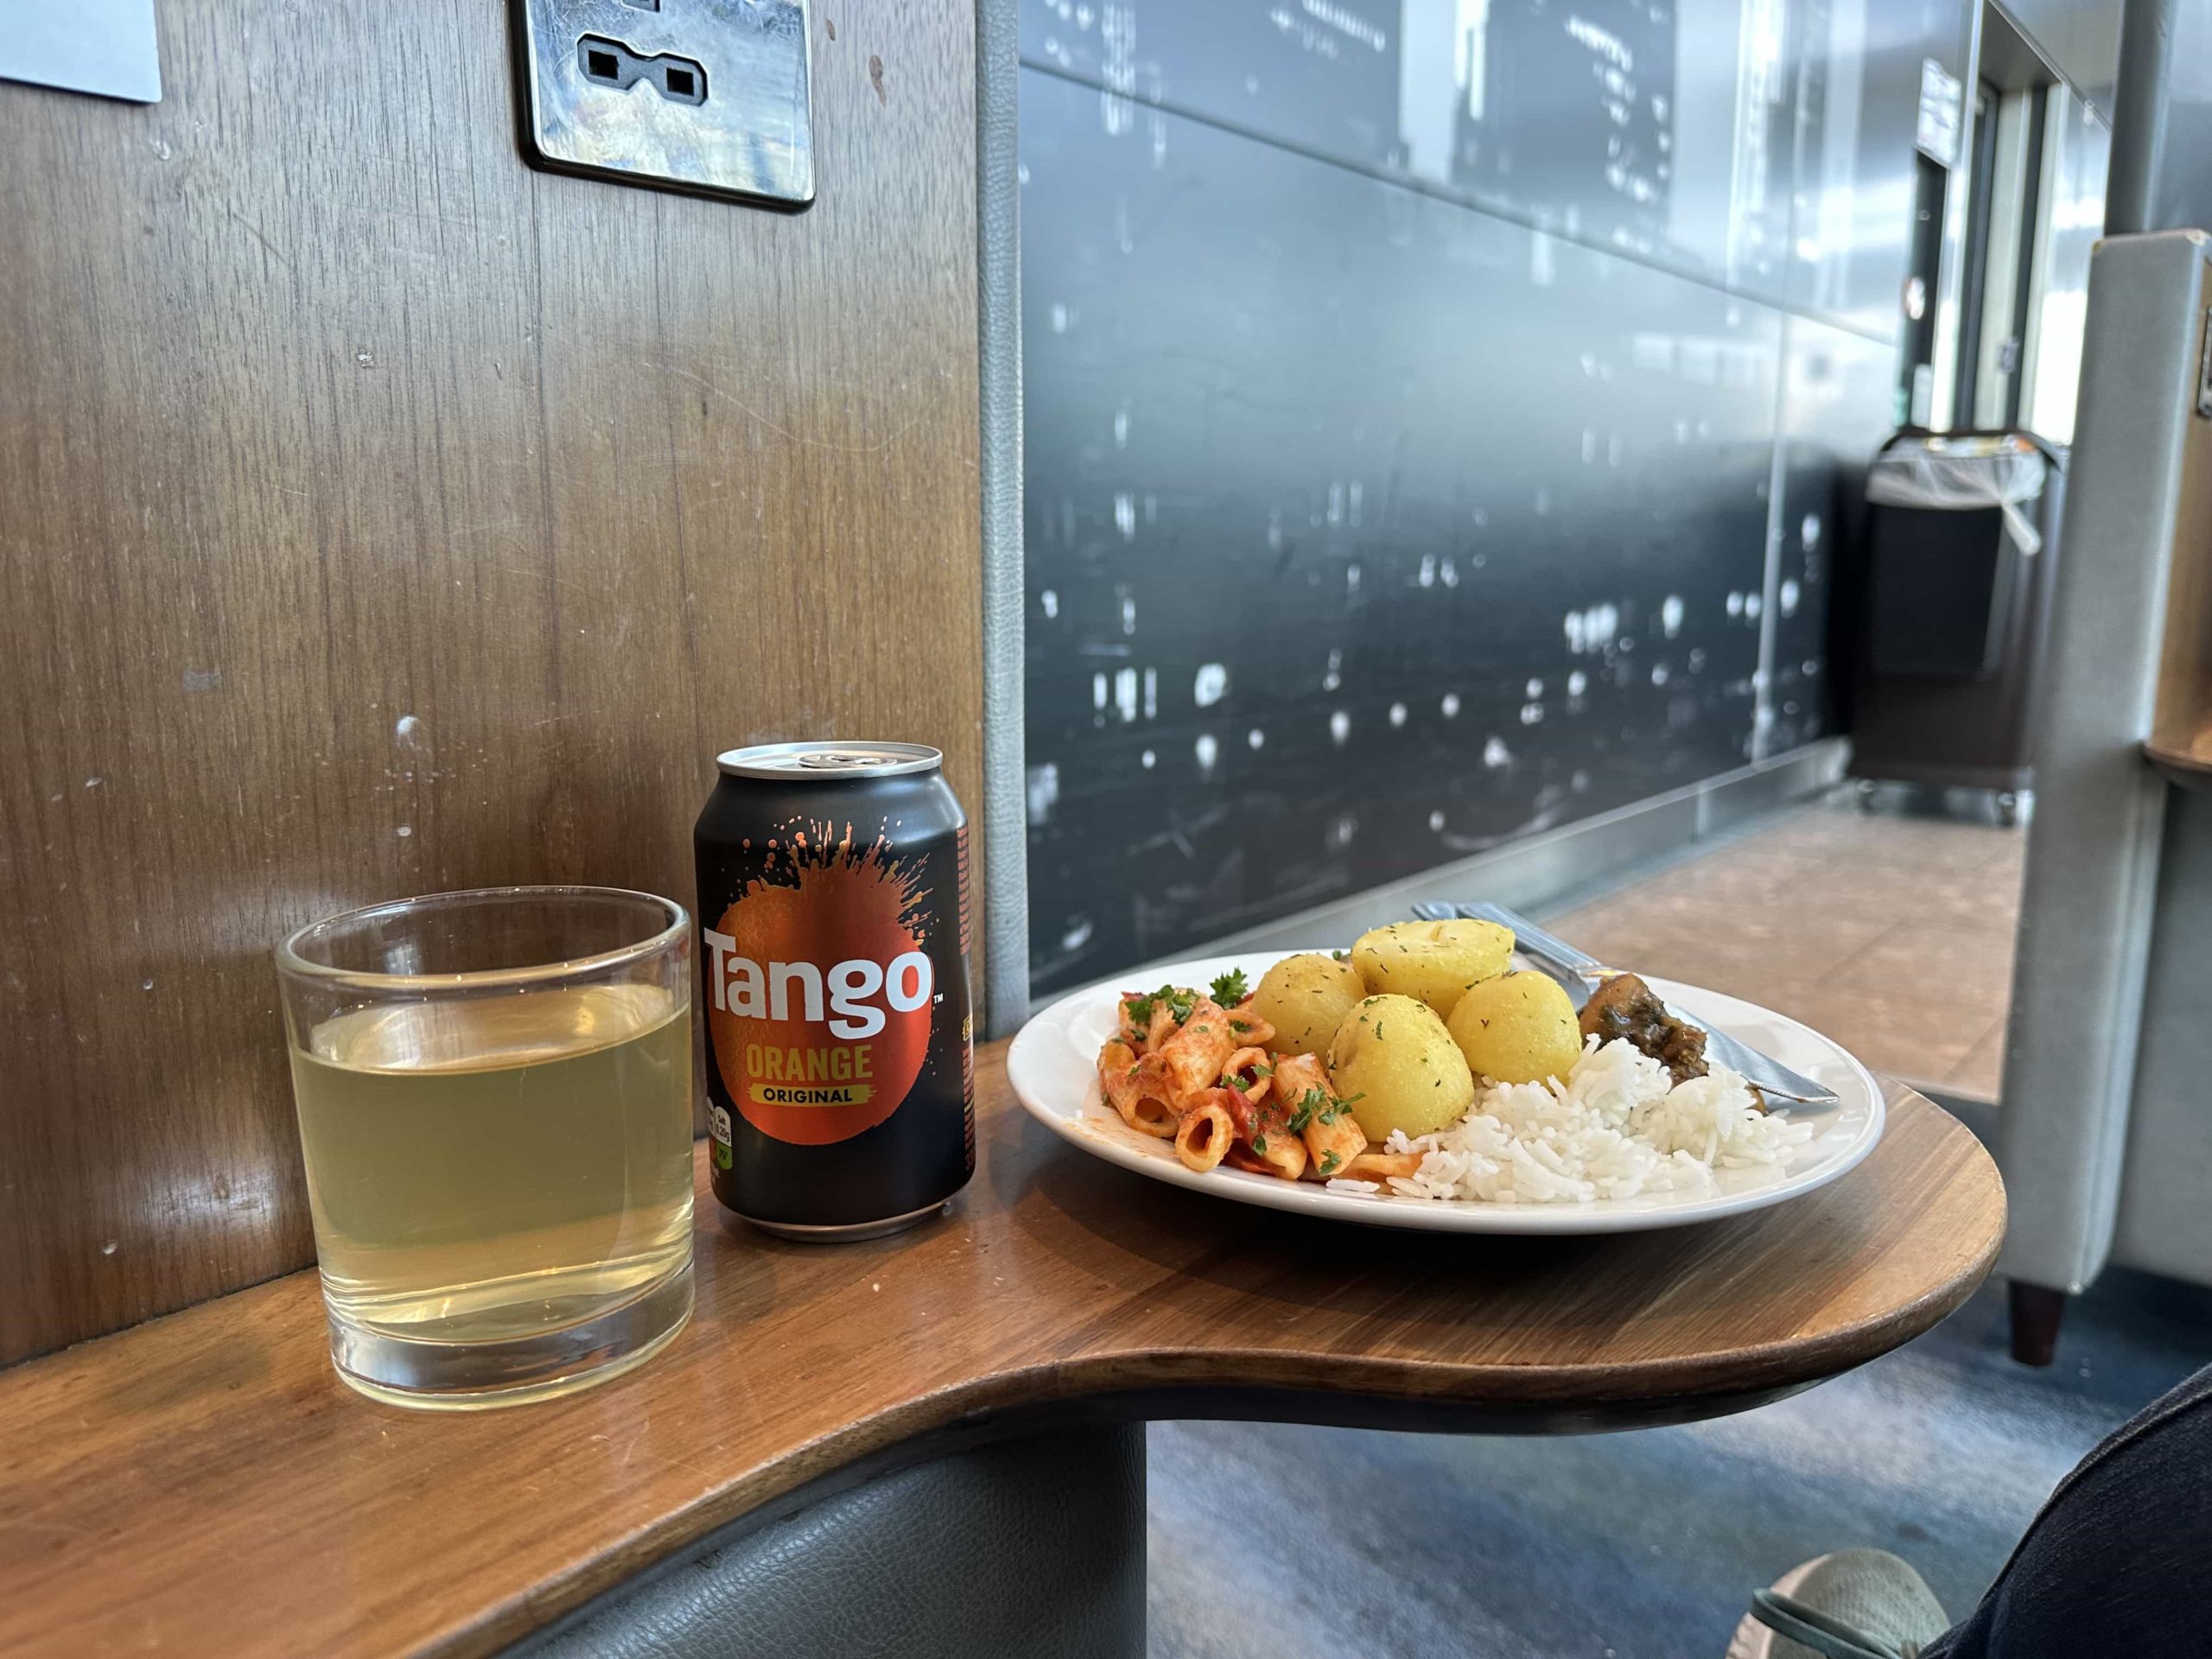 A fruit-infused water, a can of Tango, and a plate of curry, rice, pasta, and potatoes